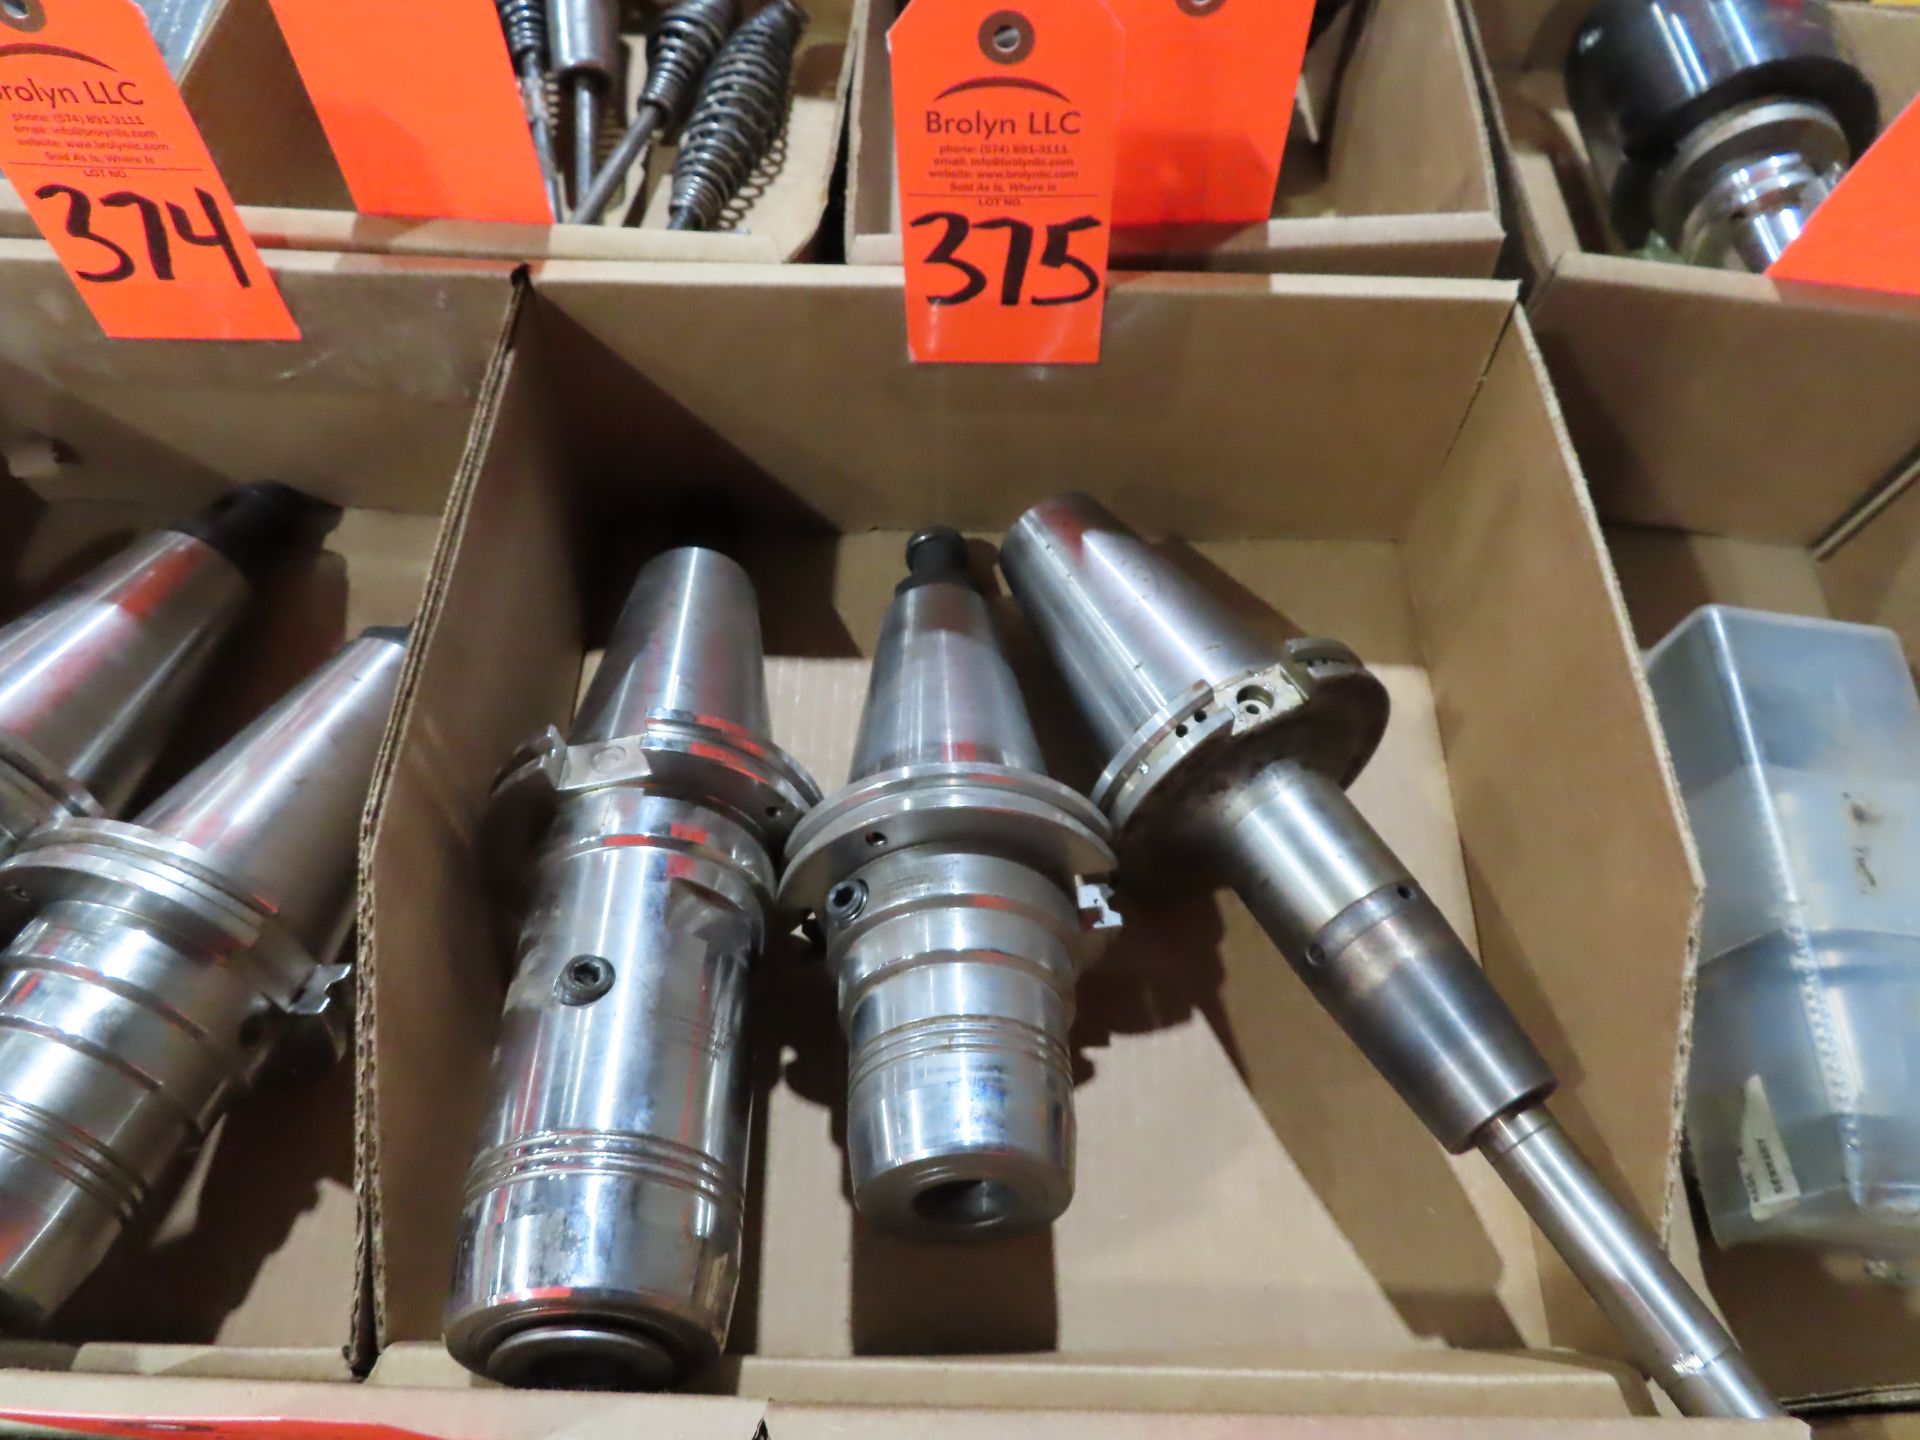 (Qty 3) Schunk CAT50 tools. This lot can be picked up onsite with no loading fee. Should you need